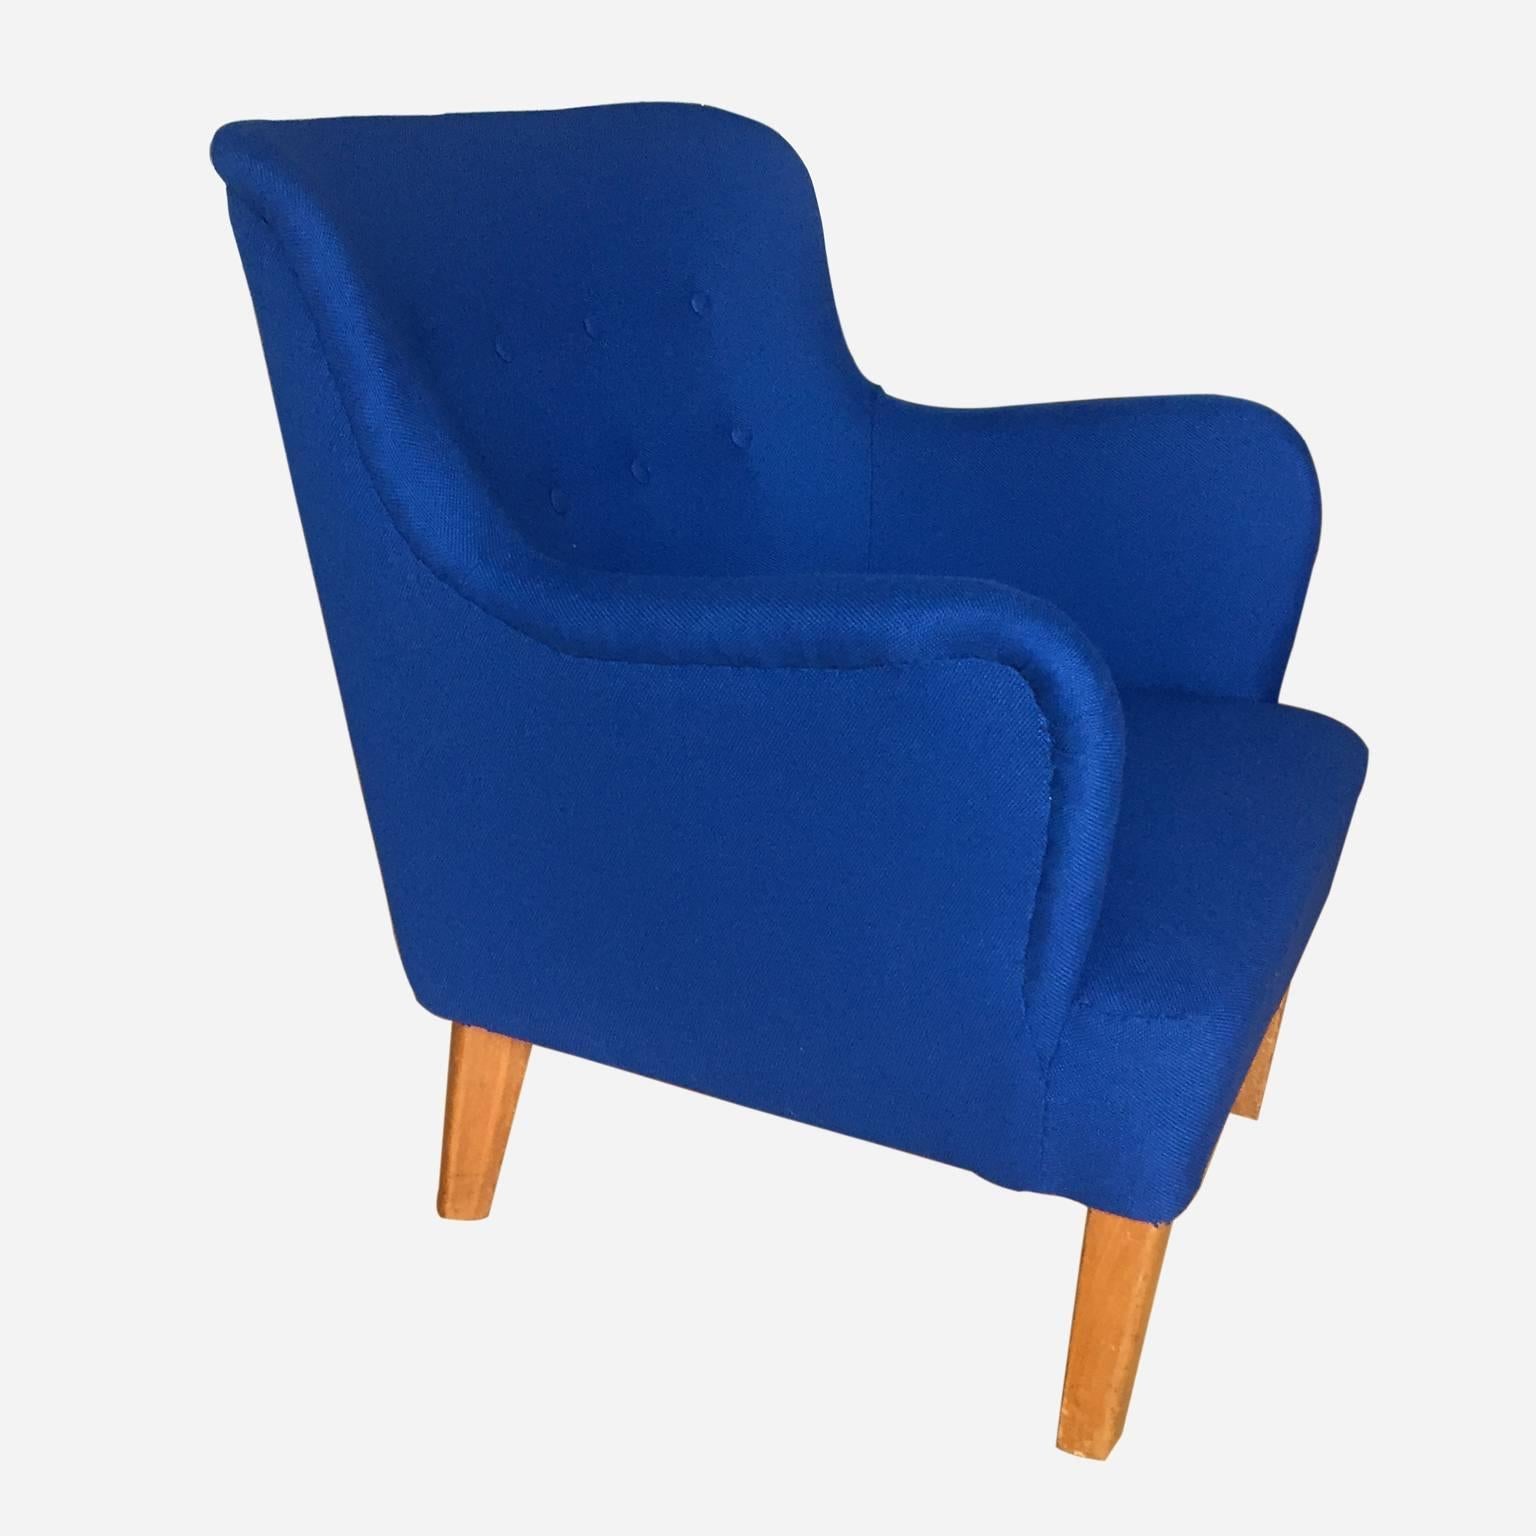 This stylish pair of armchairs was designed by Peter Hvidt for manufacturer Fritz Hansen, Denmark, circa 1950. It has been re-upholstered using 100% Trevira CS Blue fabric, which has the particularity of being flame retardant, as well as an easy